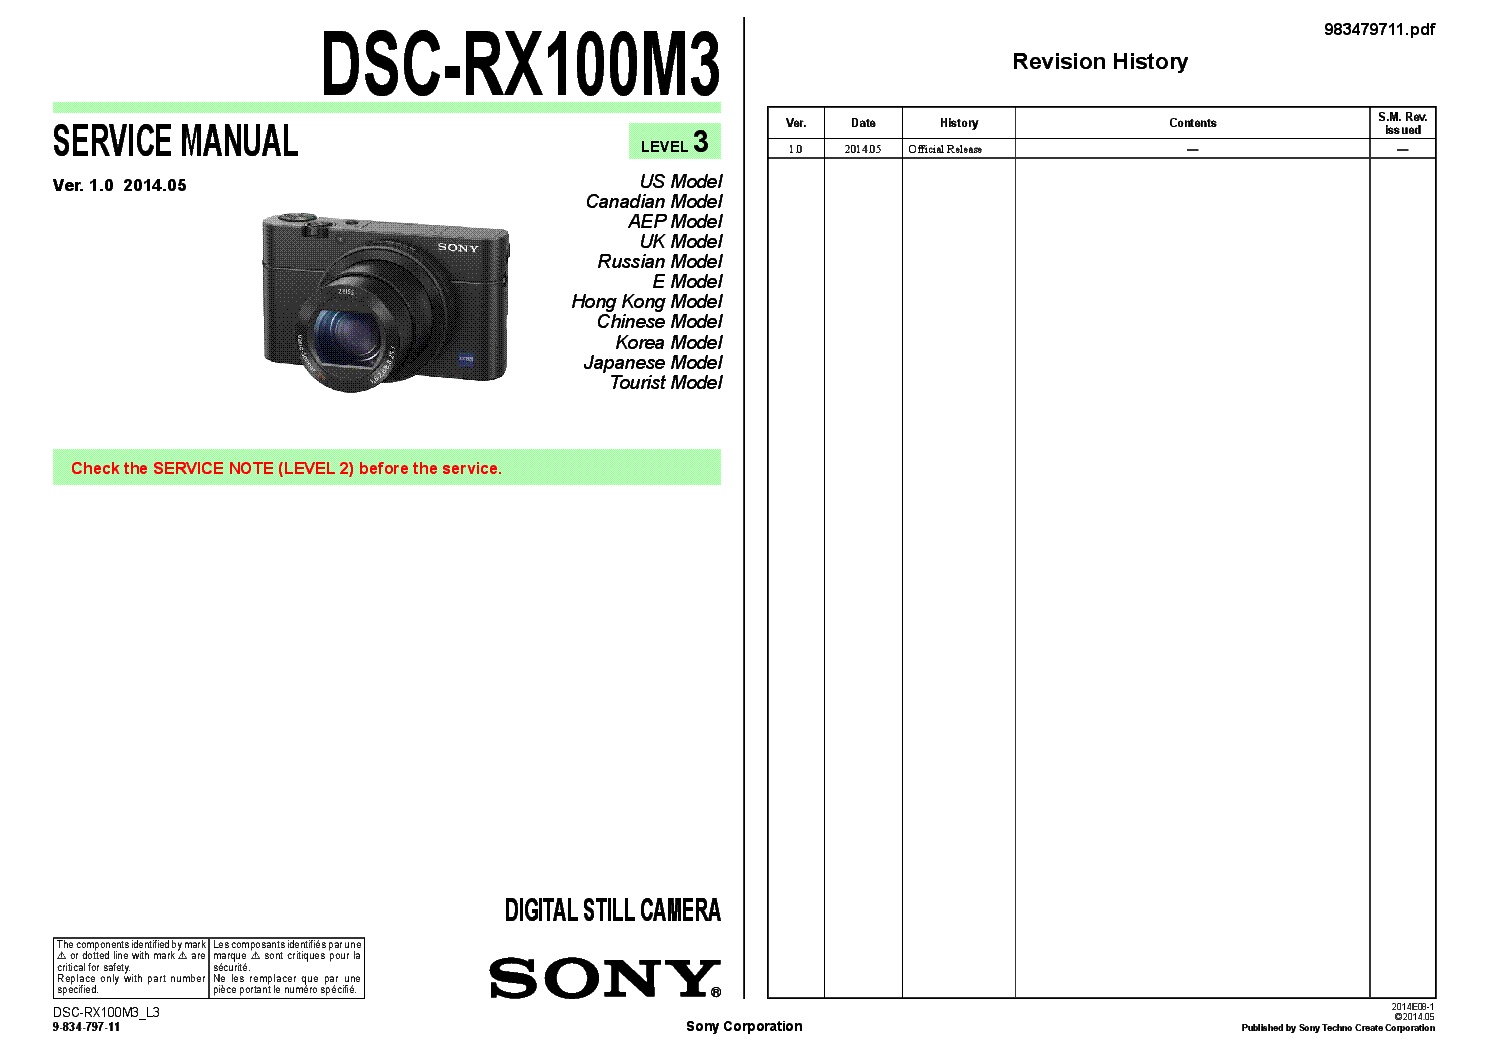 SONY DSC-RX100M3 VER.1.0 LEVEL3 service manual (1st page)